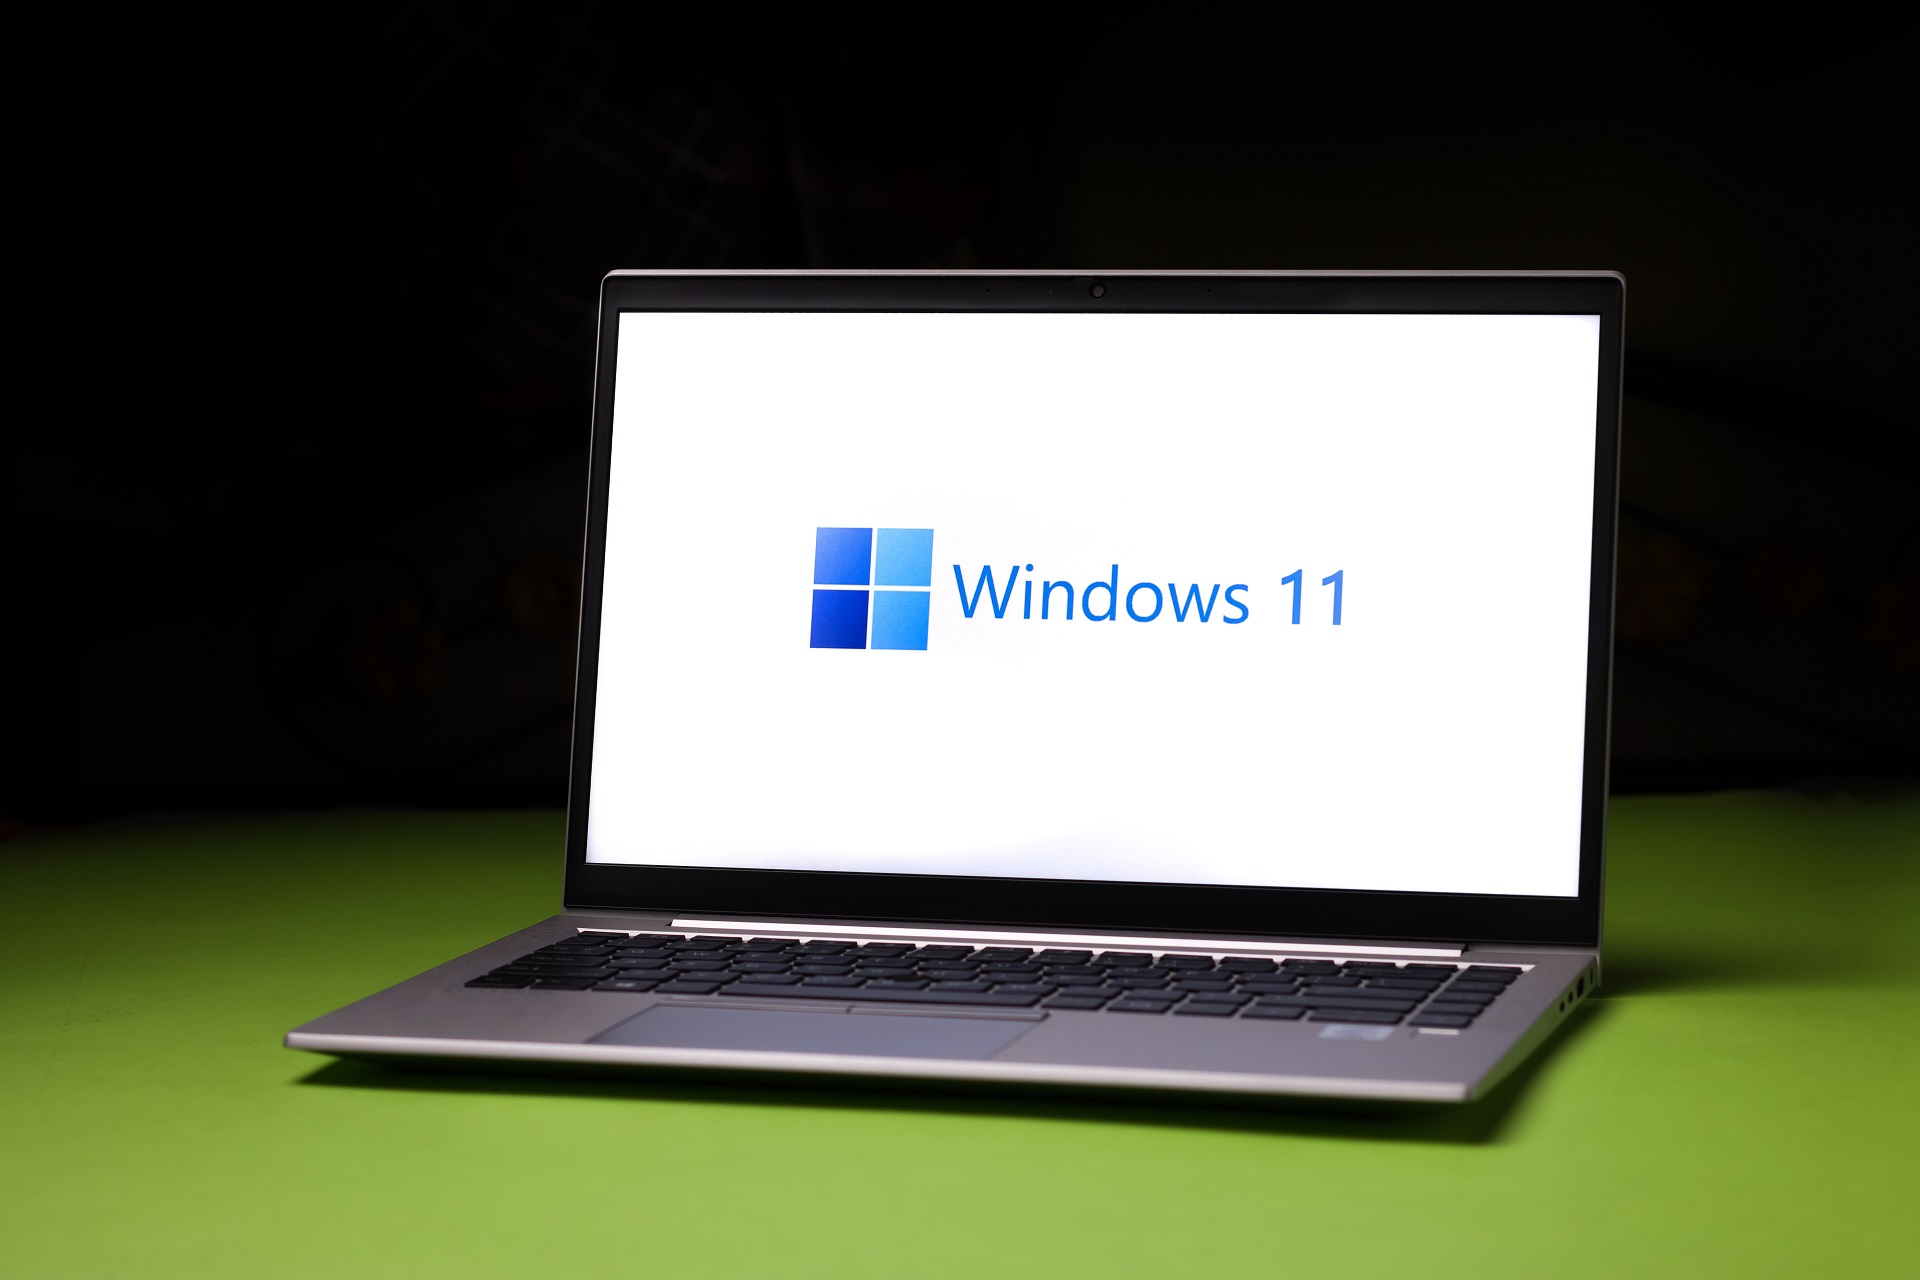 Tips on how to watch the Windows 11 unveiling